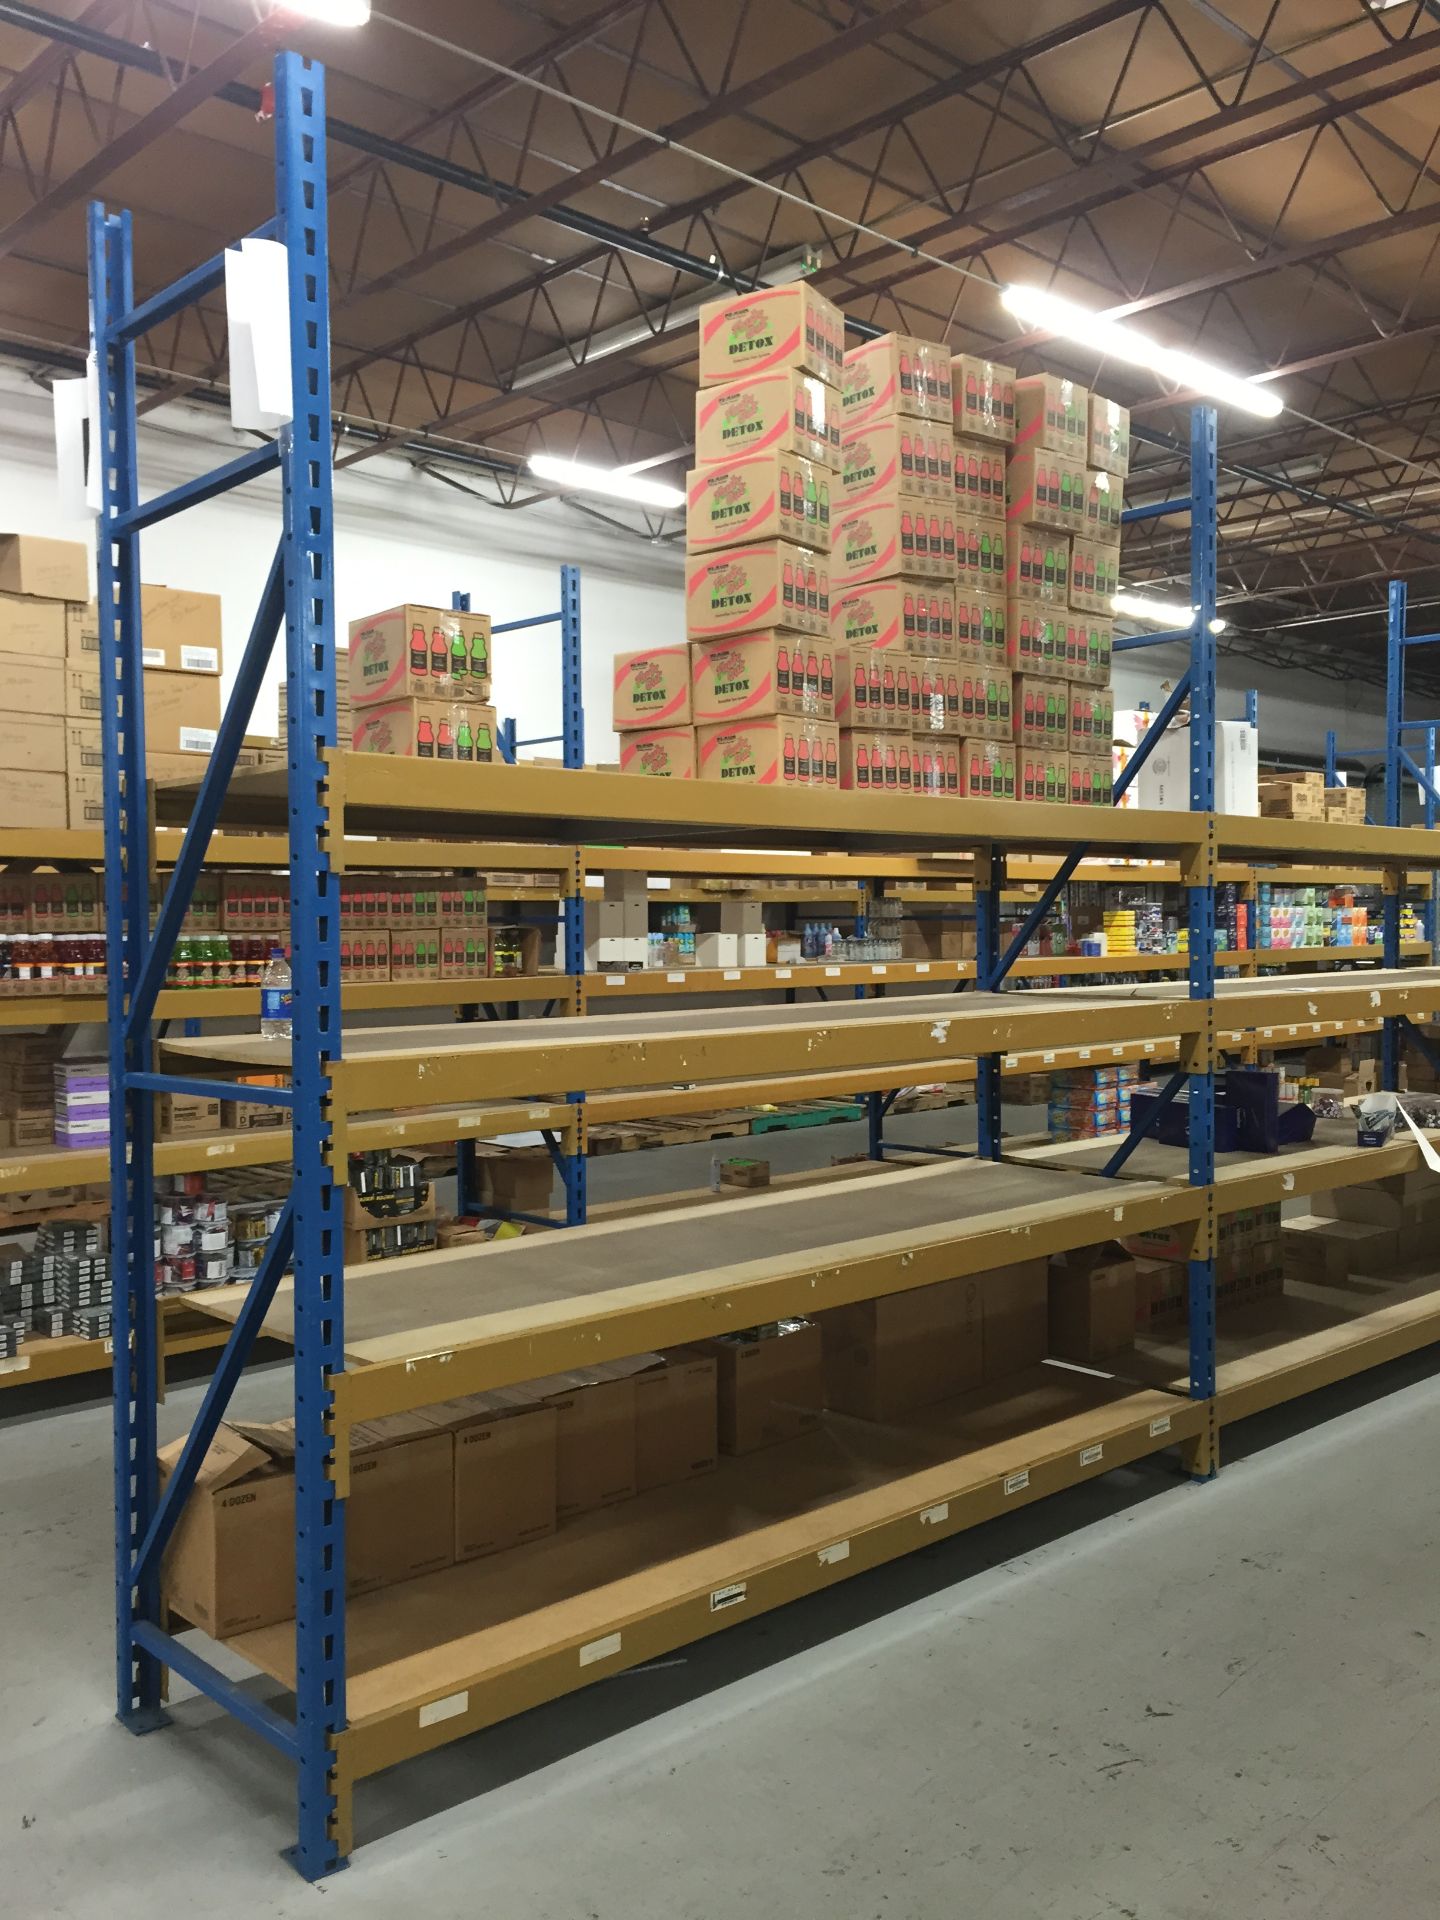 20 BAYS OF 120"H X 32"D X 108"L STOCK ROOM PALLET RACK SHELVING,  TOTAL 20 BAYS, ONE MONEY. - Image 3 of 5